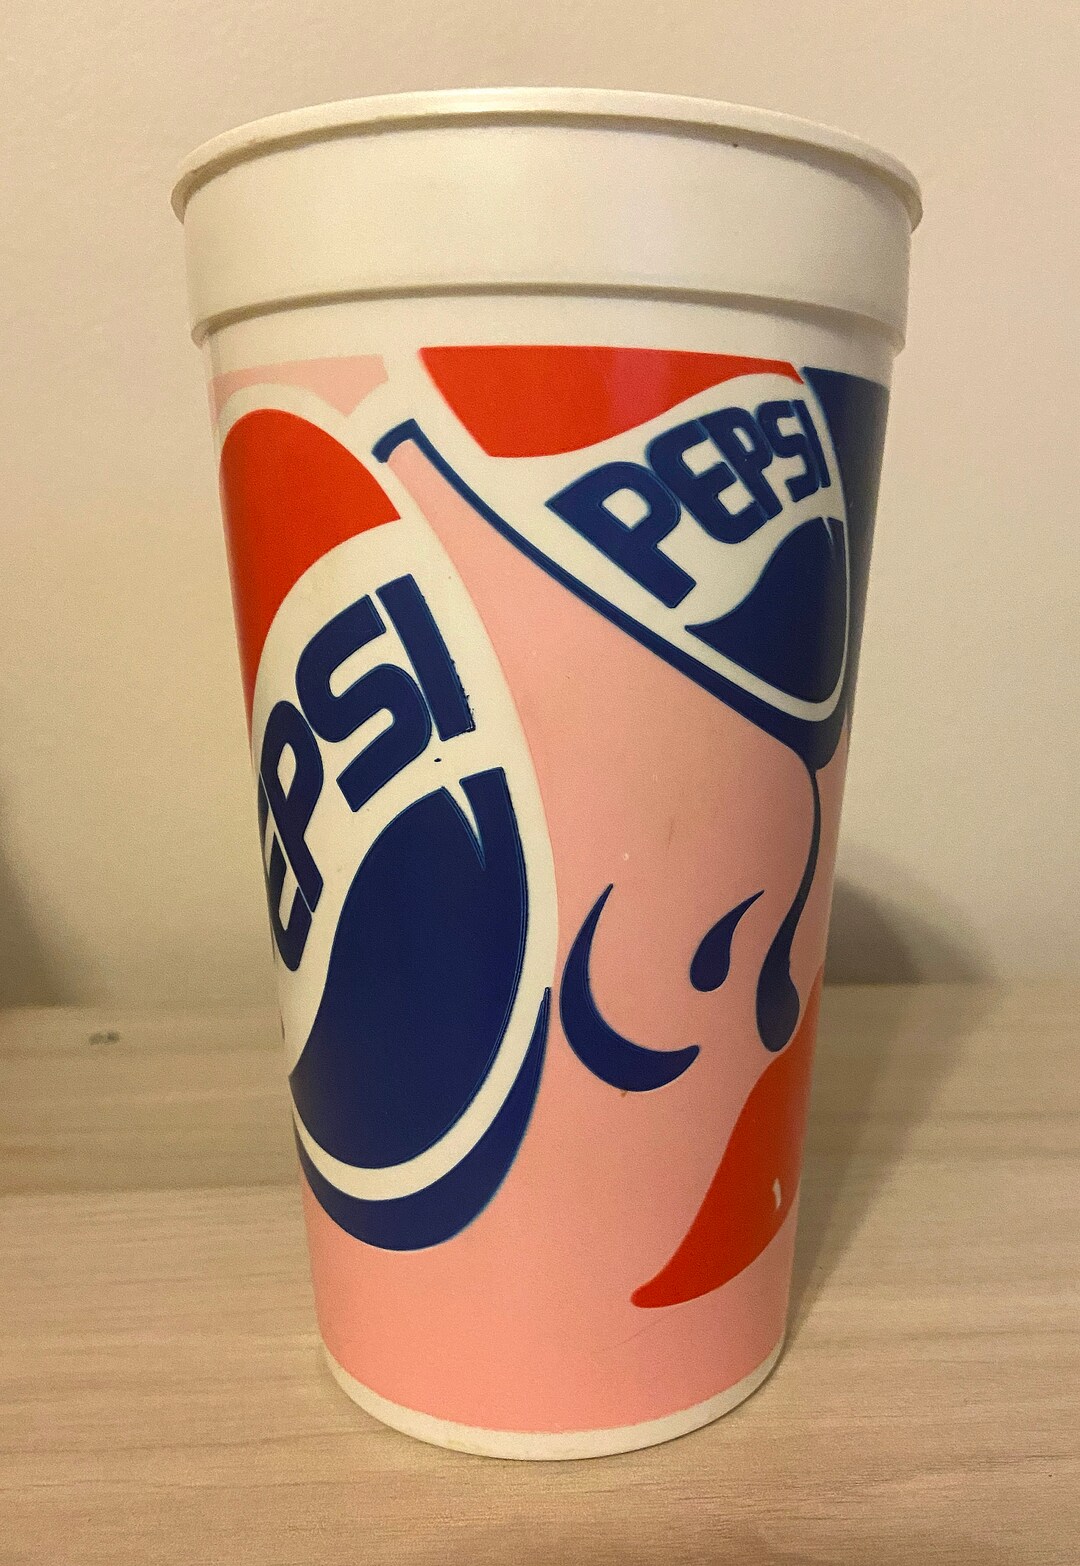 Endangered Animals Kid's Cups With Lids, Pizza Hut, Pepsi, 1990s Vintage,  Rare